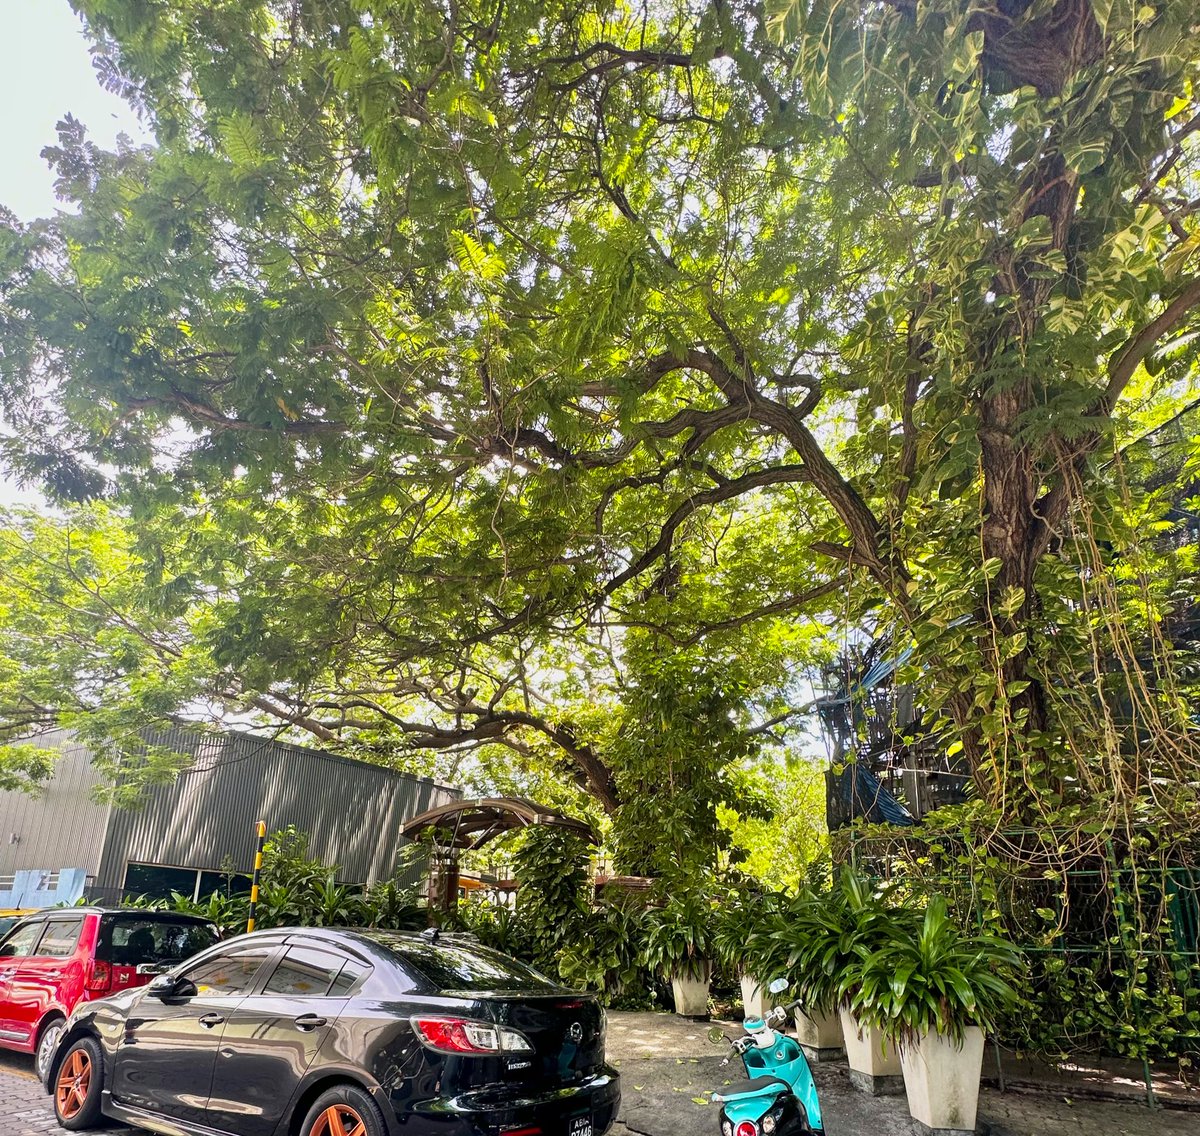 Shouldn’t Sultan Park have more entraces/exits for pedestrians to enjoy shortcuts through it? Isn’t that one of the purposes of having parks? Malé has limited green spaces as it is. Providing shortcuts shaded by trees is one way to encourage walking. @MaleCitymv